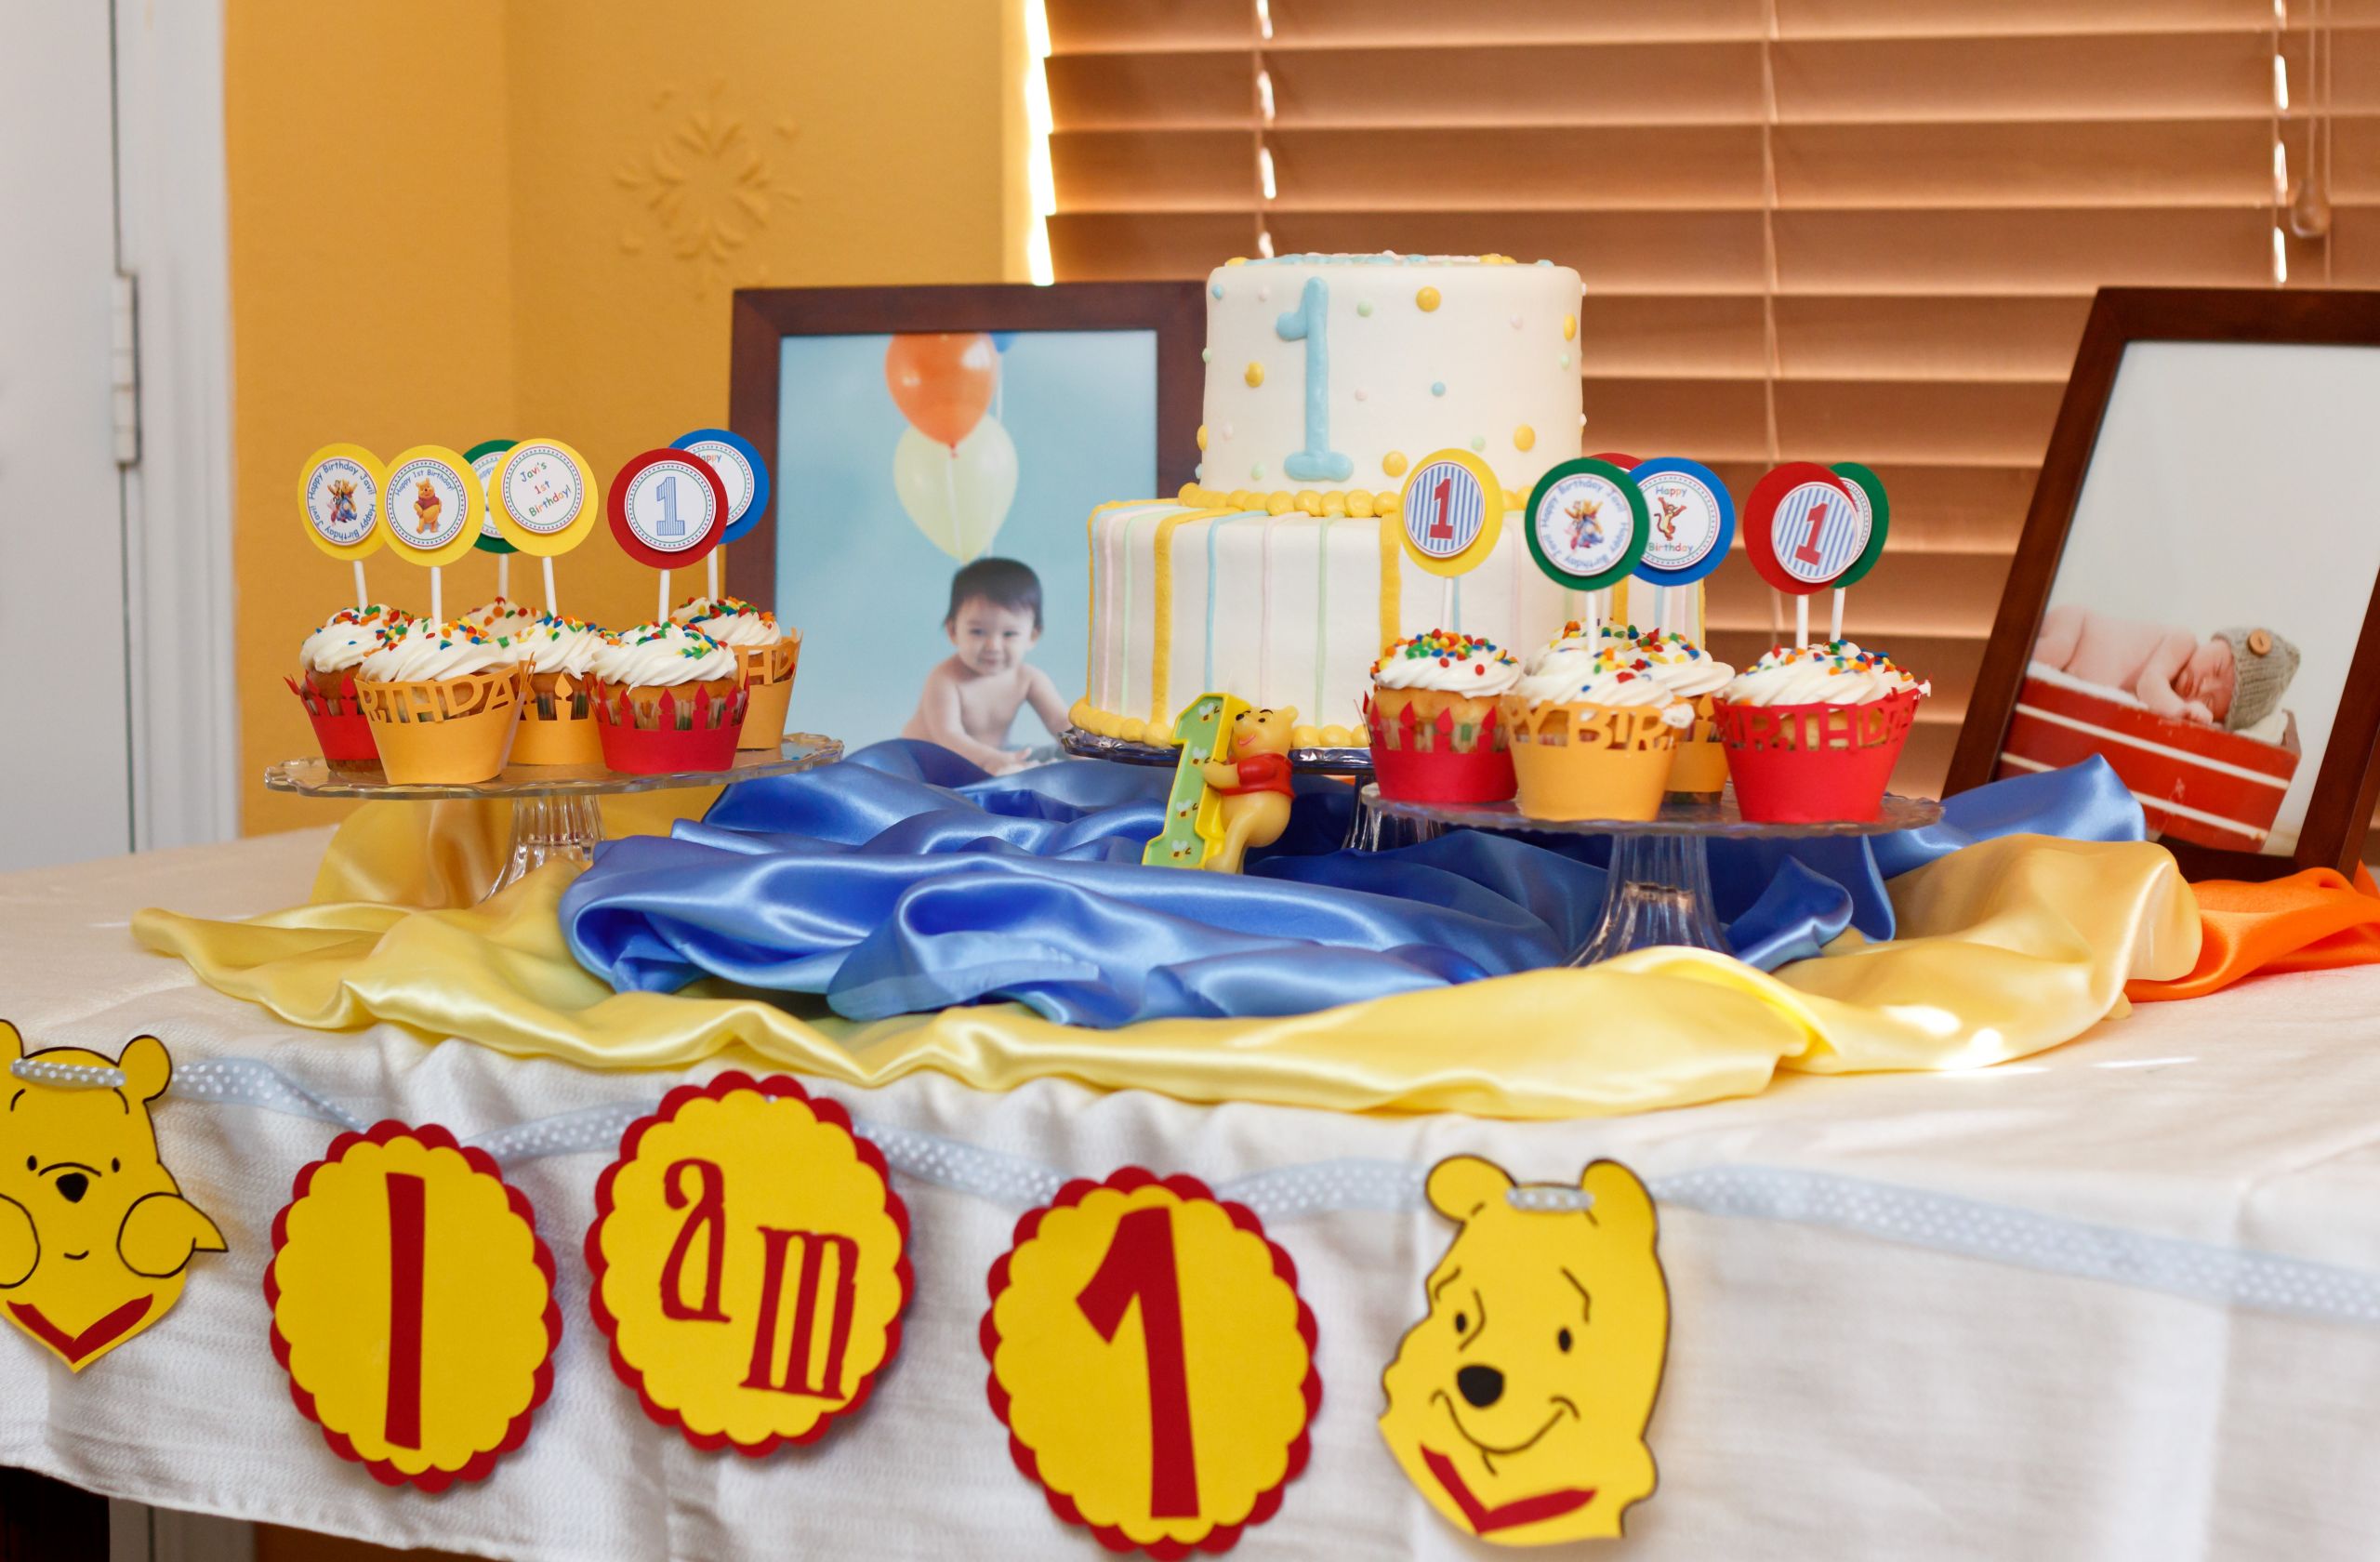 Winnie The Pooh 1st Birthday Decorations
 Winnie the Pooh My son’s first birthday party